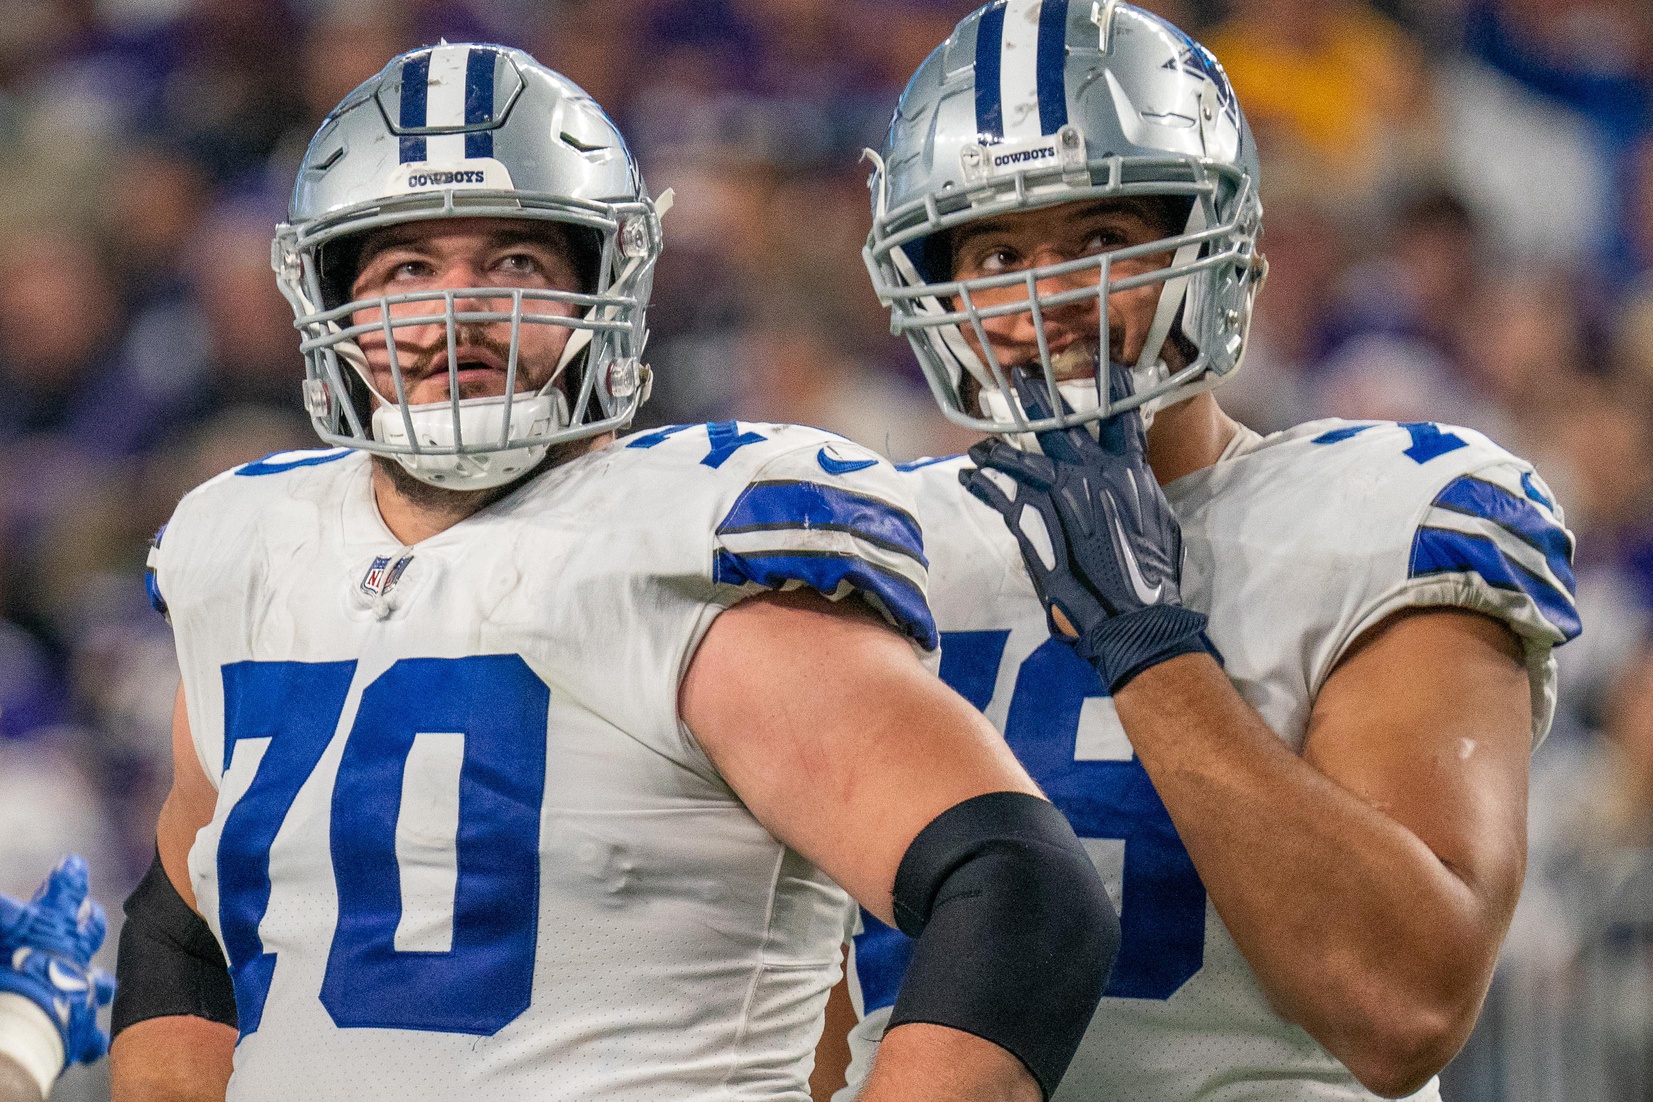 Oct 31, 2021; Minneapolis, Minnesota, USA; Dallas Cowboys guard Zack Martin (70) and Dallas Cowboys offensive tackle Terence Steele (78) look at a replay late in the game against the Minnesota Vikings at U.S. Bank Stadium. Mandatory Credit: Matt Blewett-USA TODAY Sports